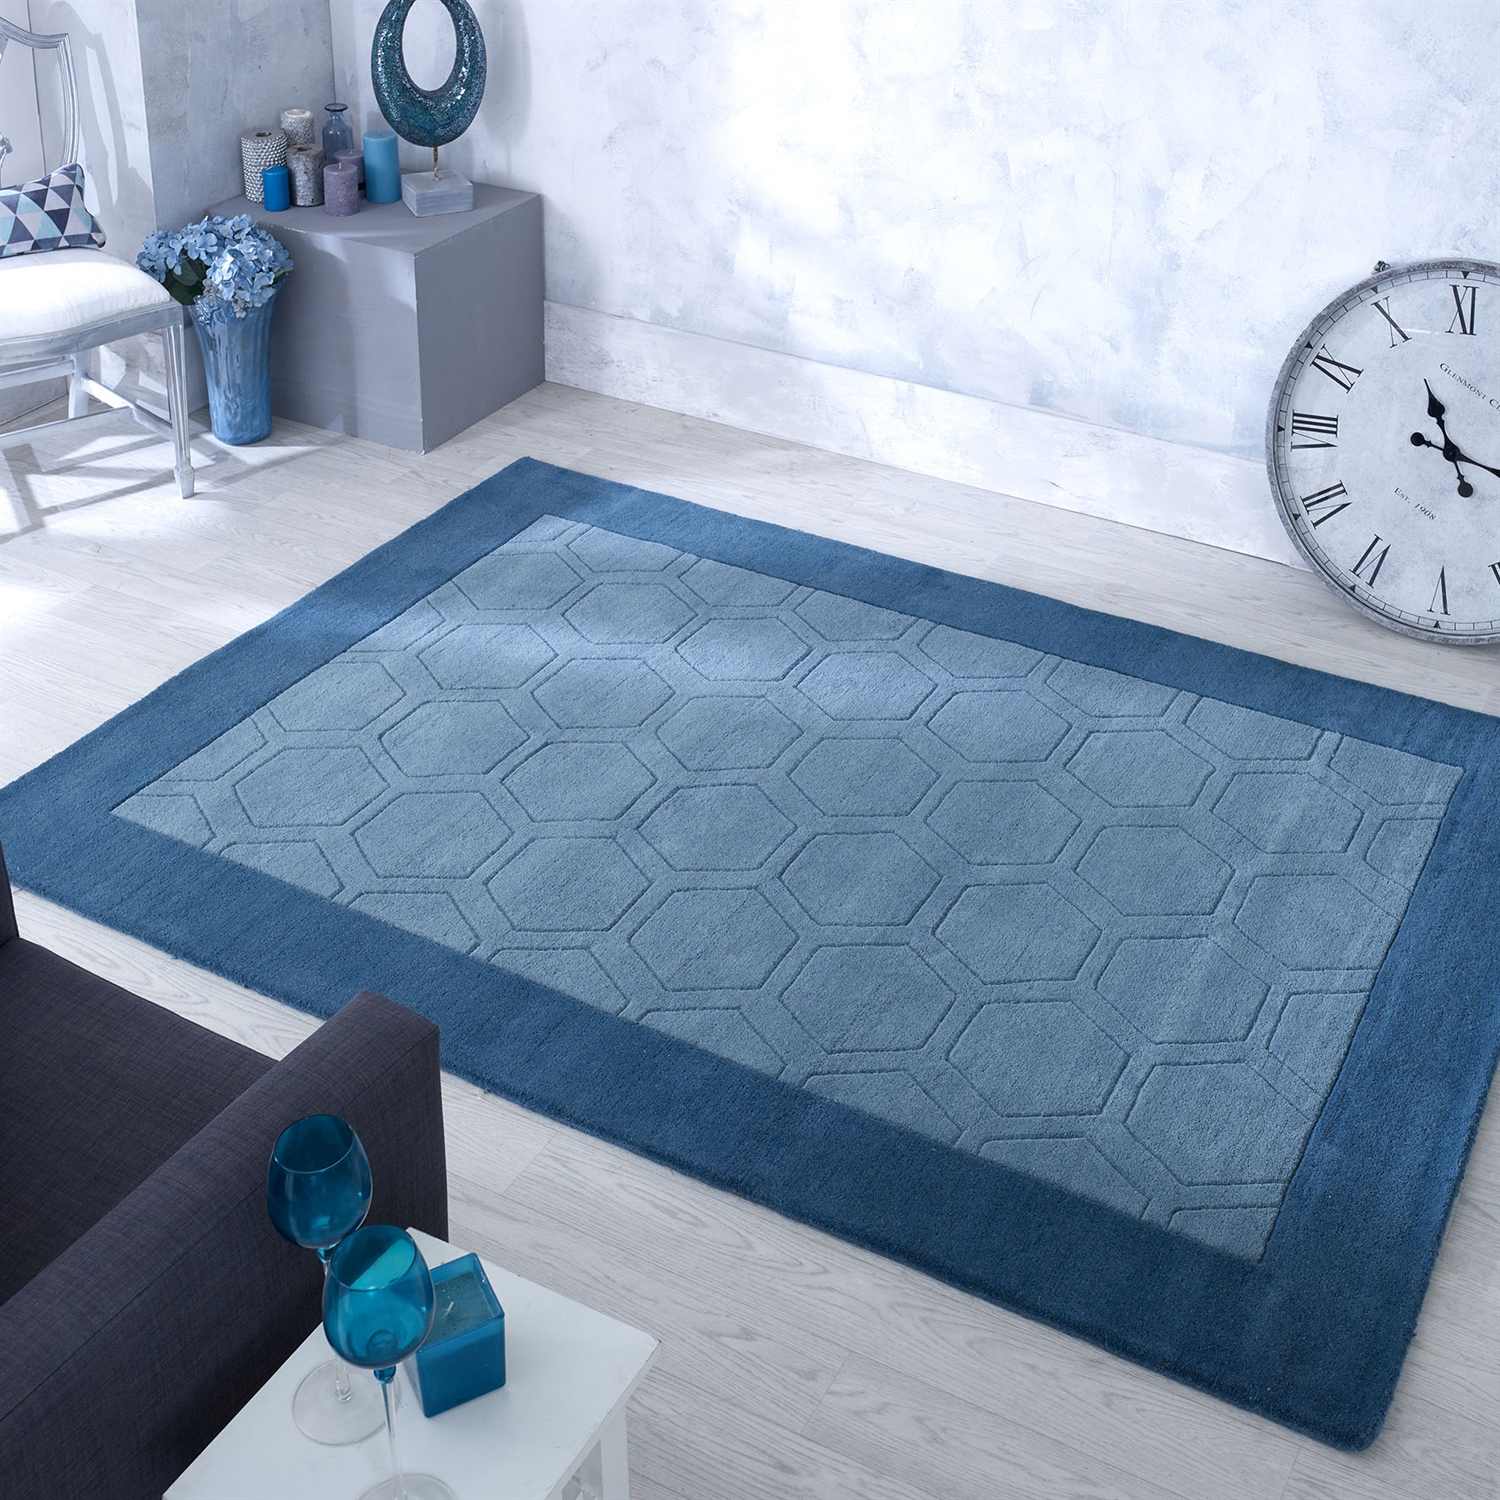 Hex Teal Hand Tufted Wool Rugs In, Teal Colour Rugs Uk